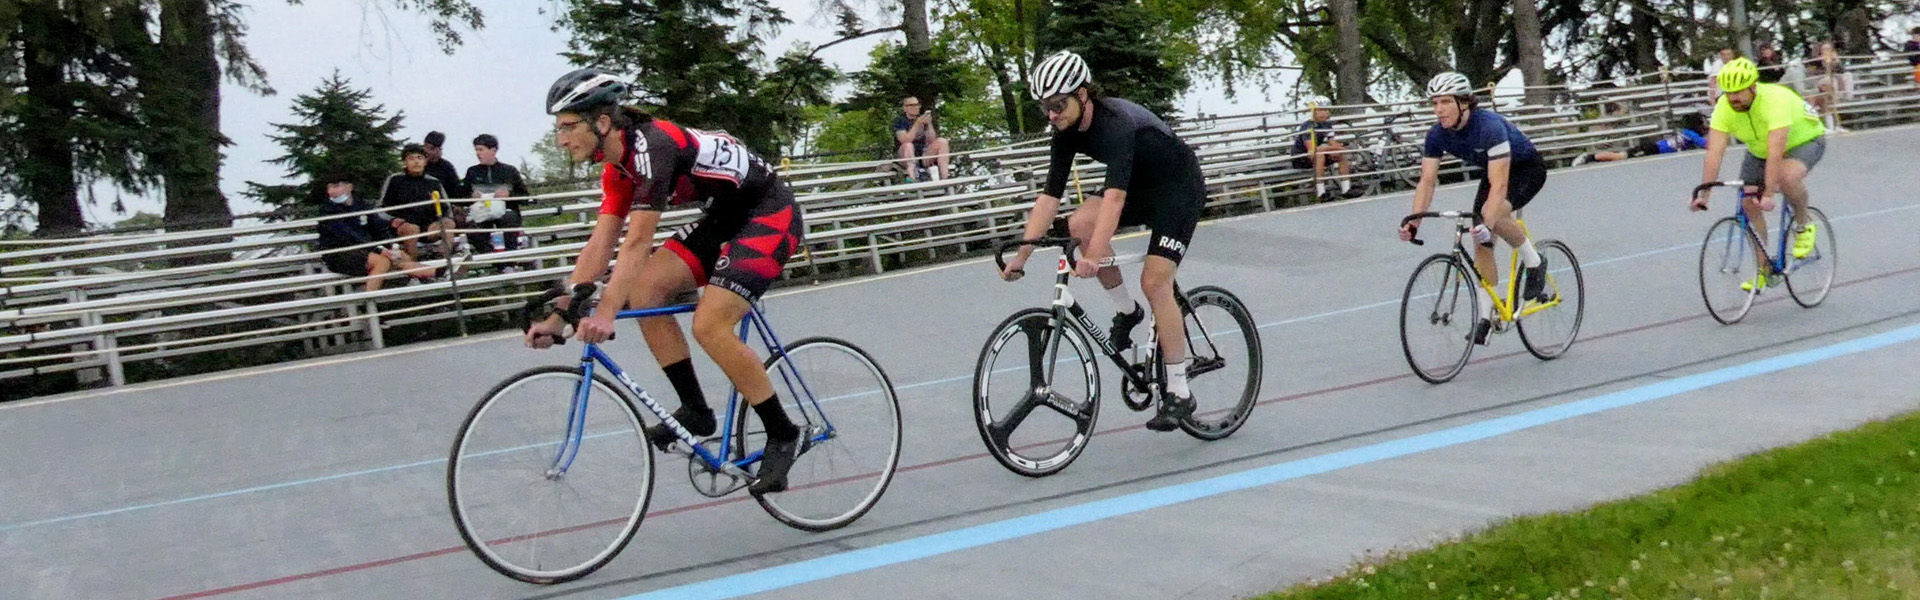 Cycling at the Northbrook Velodrome